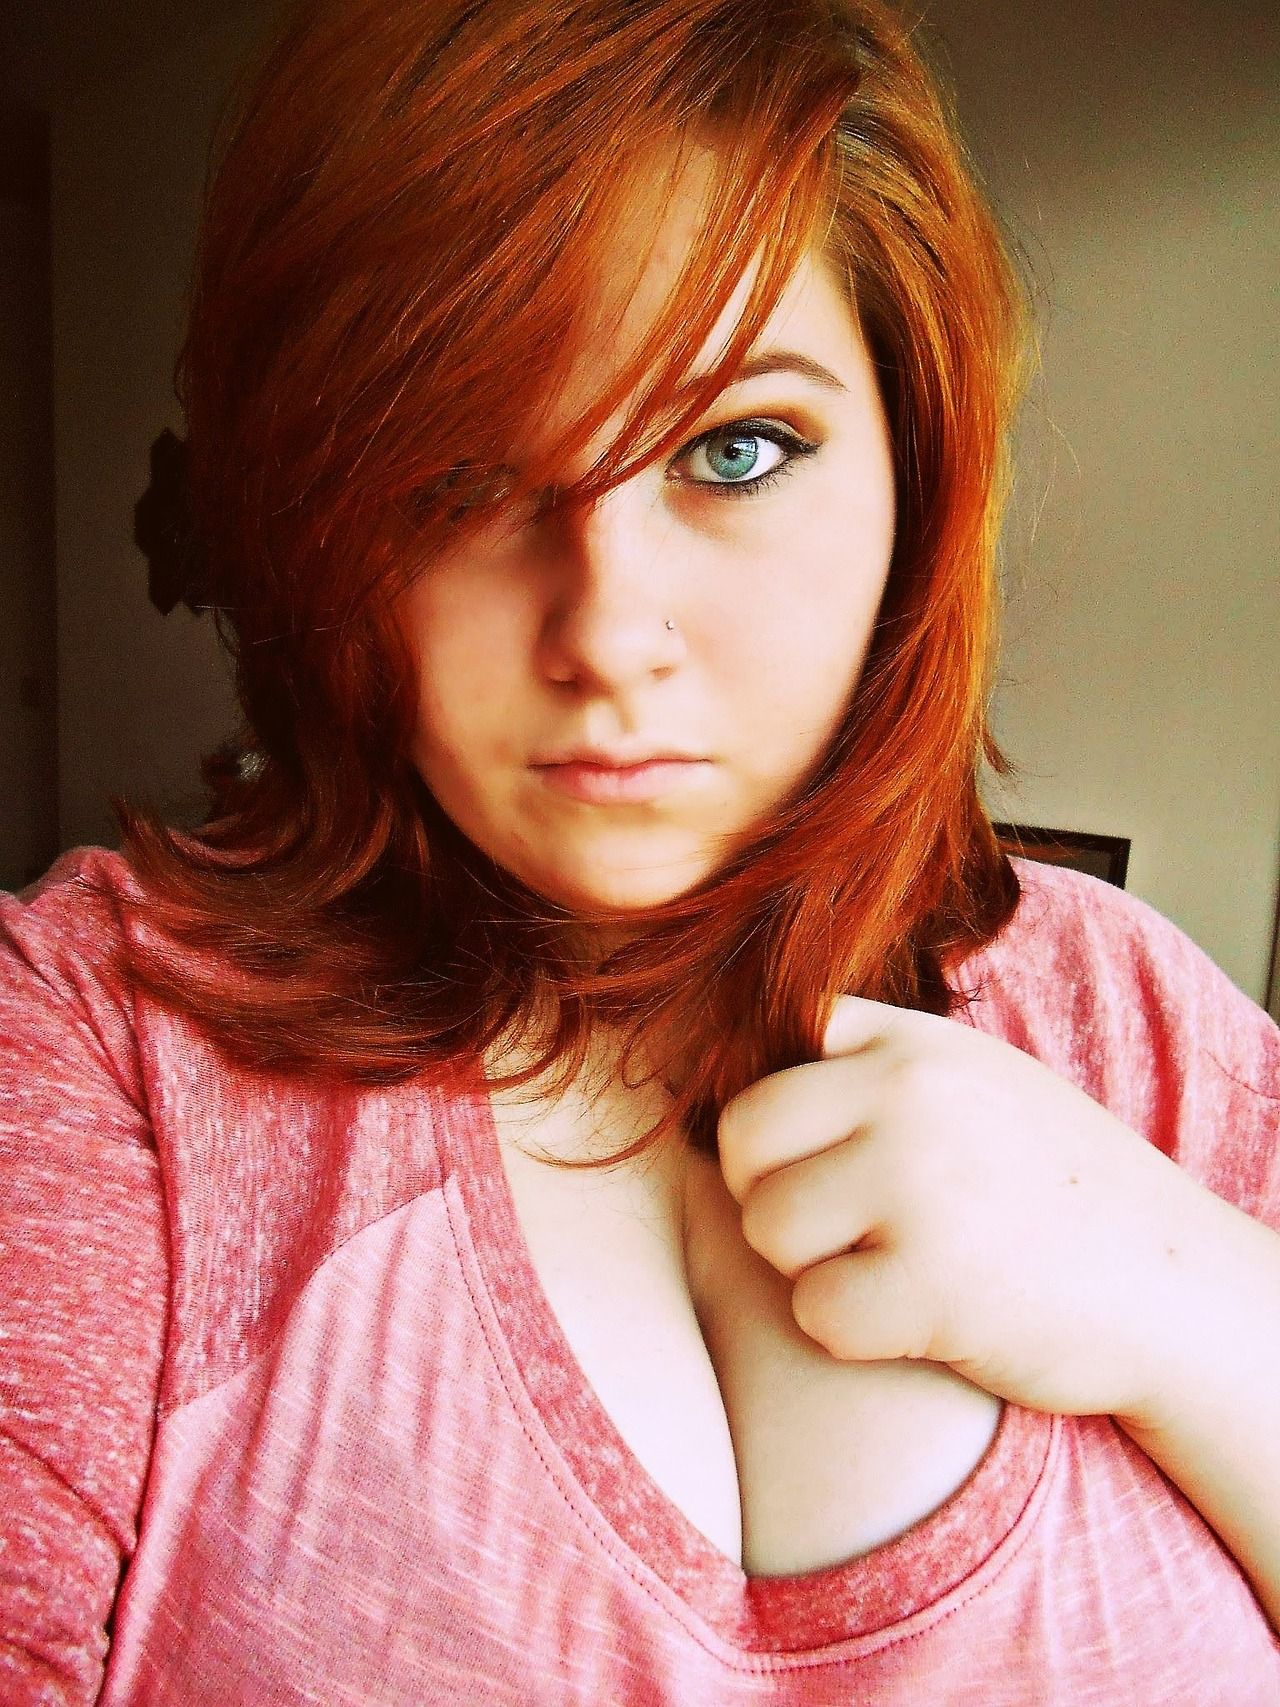 bradley sherman recommends cute chubby redheads pic